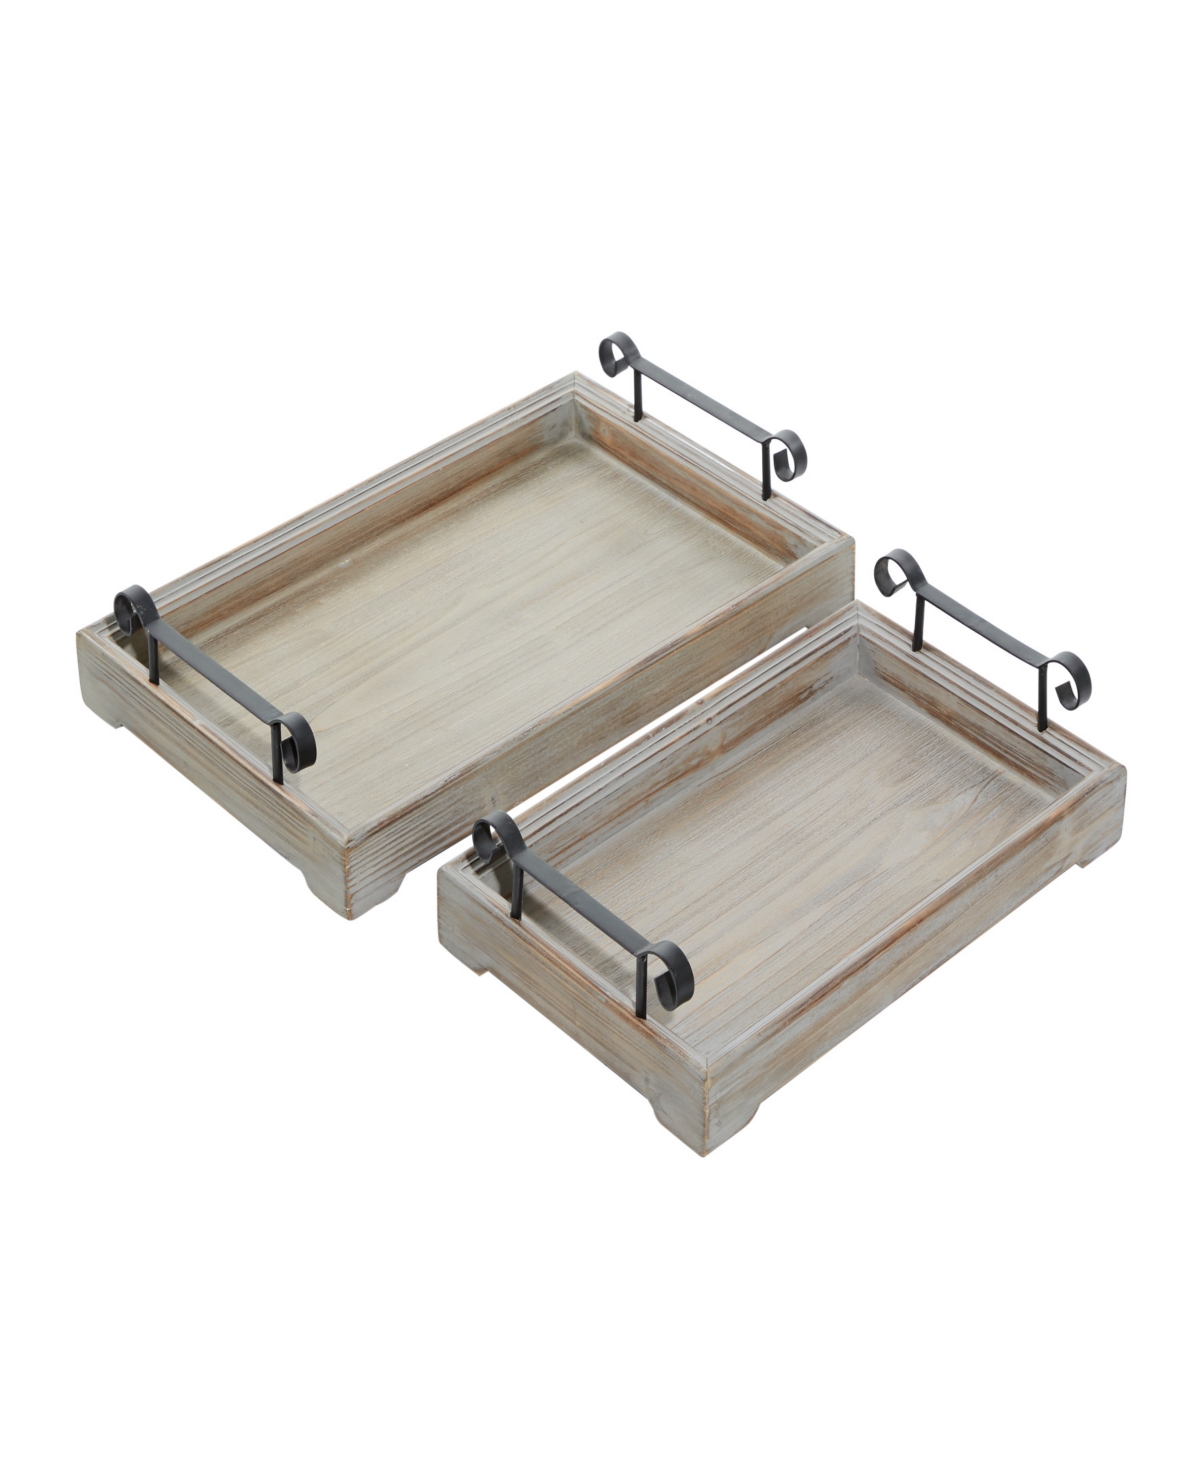 Rosemary Lane Wood Tray With Metal Handles, Set Of 2, 20", 17" W In Beige